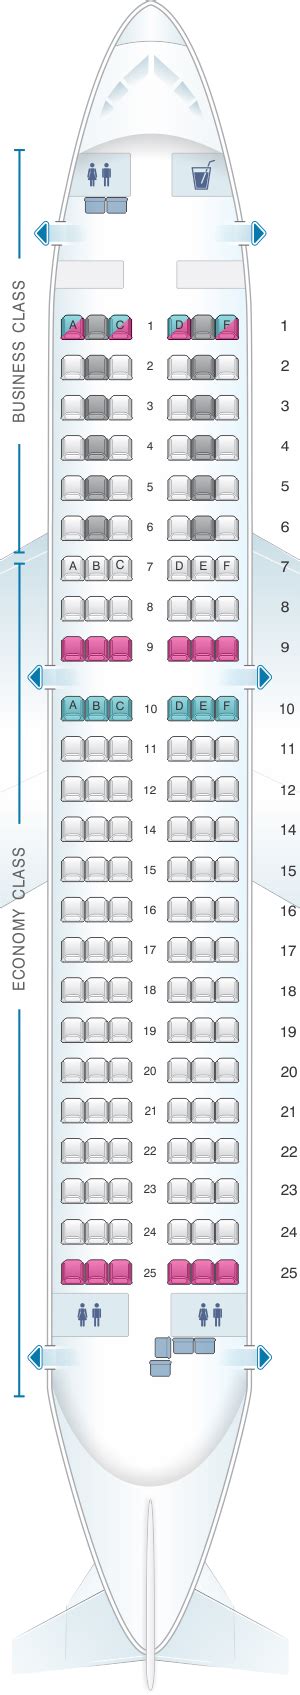 View United Airlines Airbus A319 Seating Chart  Airbus Way